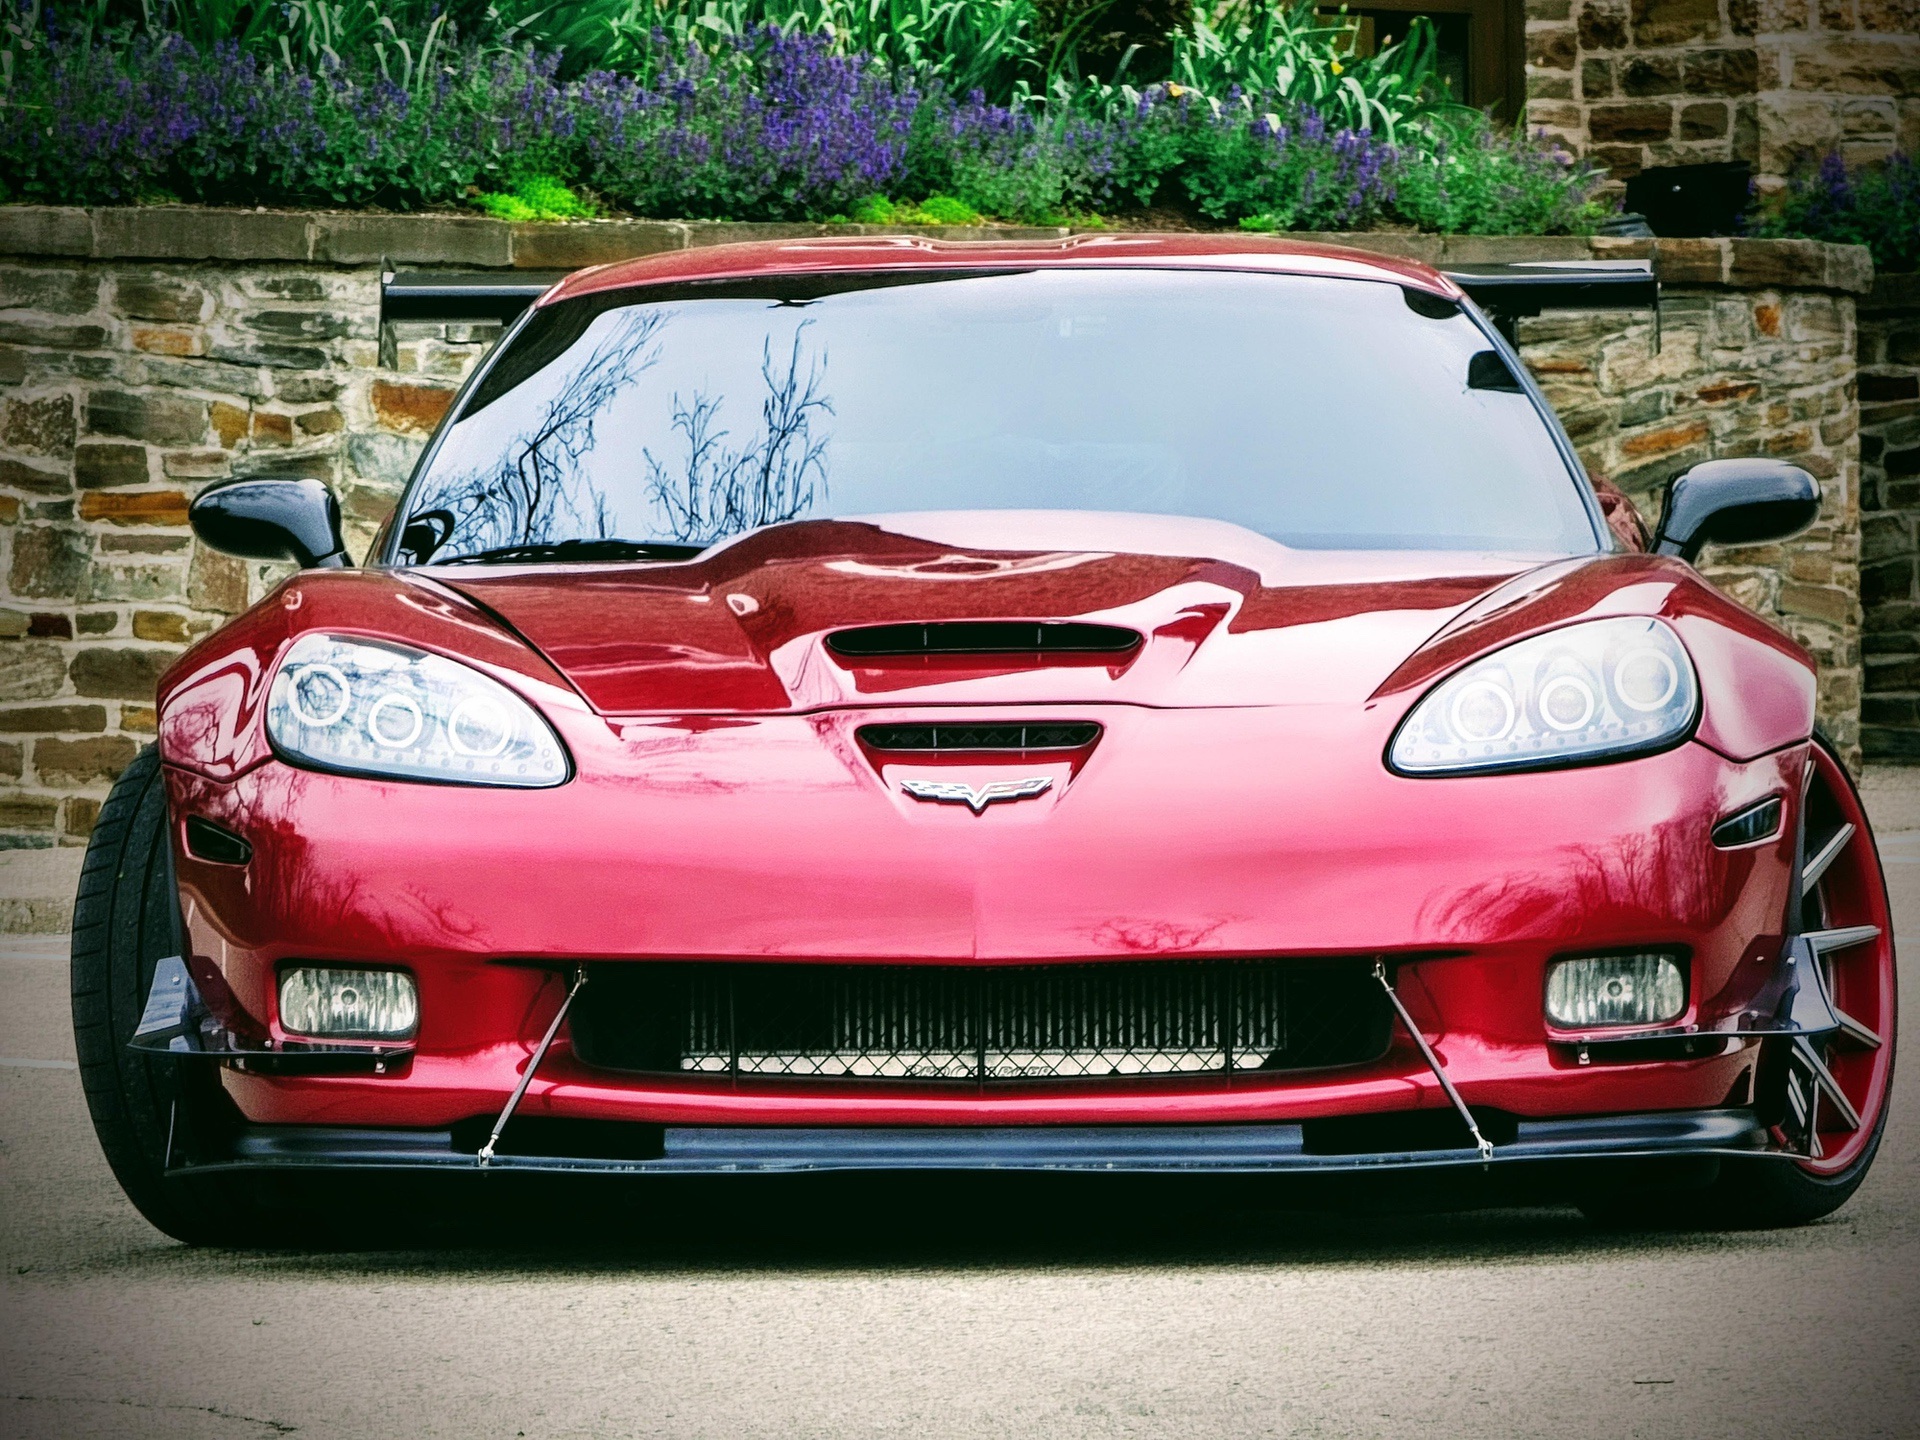 Bobby's Z06 with the widebody kit and new paint job